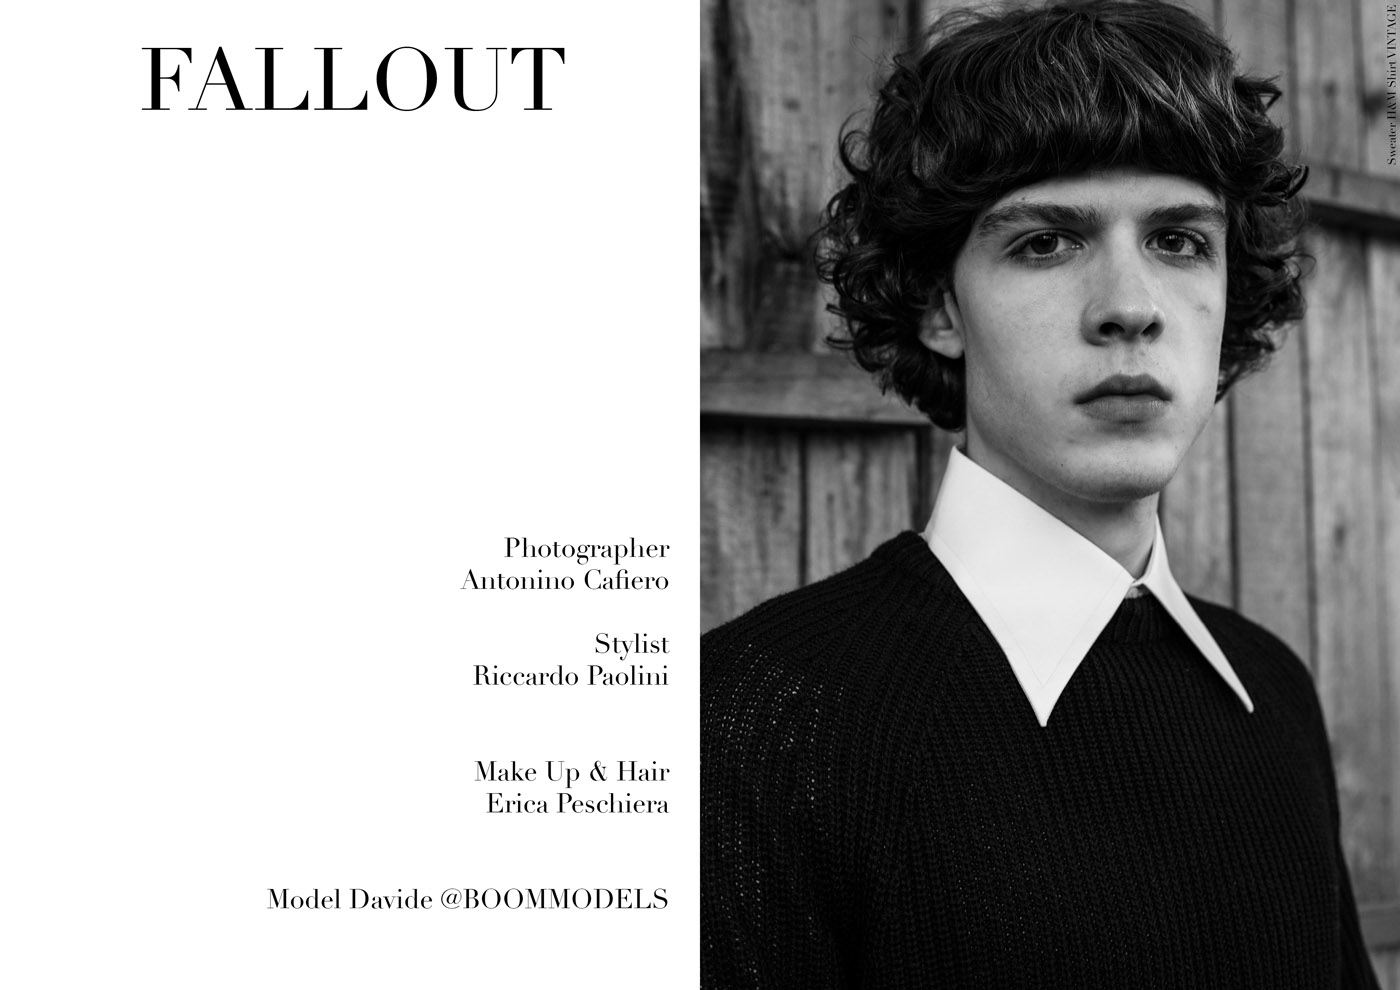 CHASSEUR WEBDITORIAL : FALLOUT BY ANTONINO CAFIERO - Chasseur Magazine